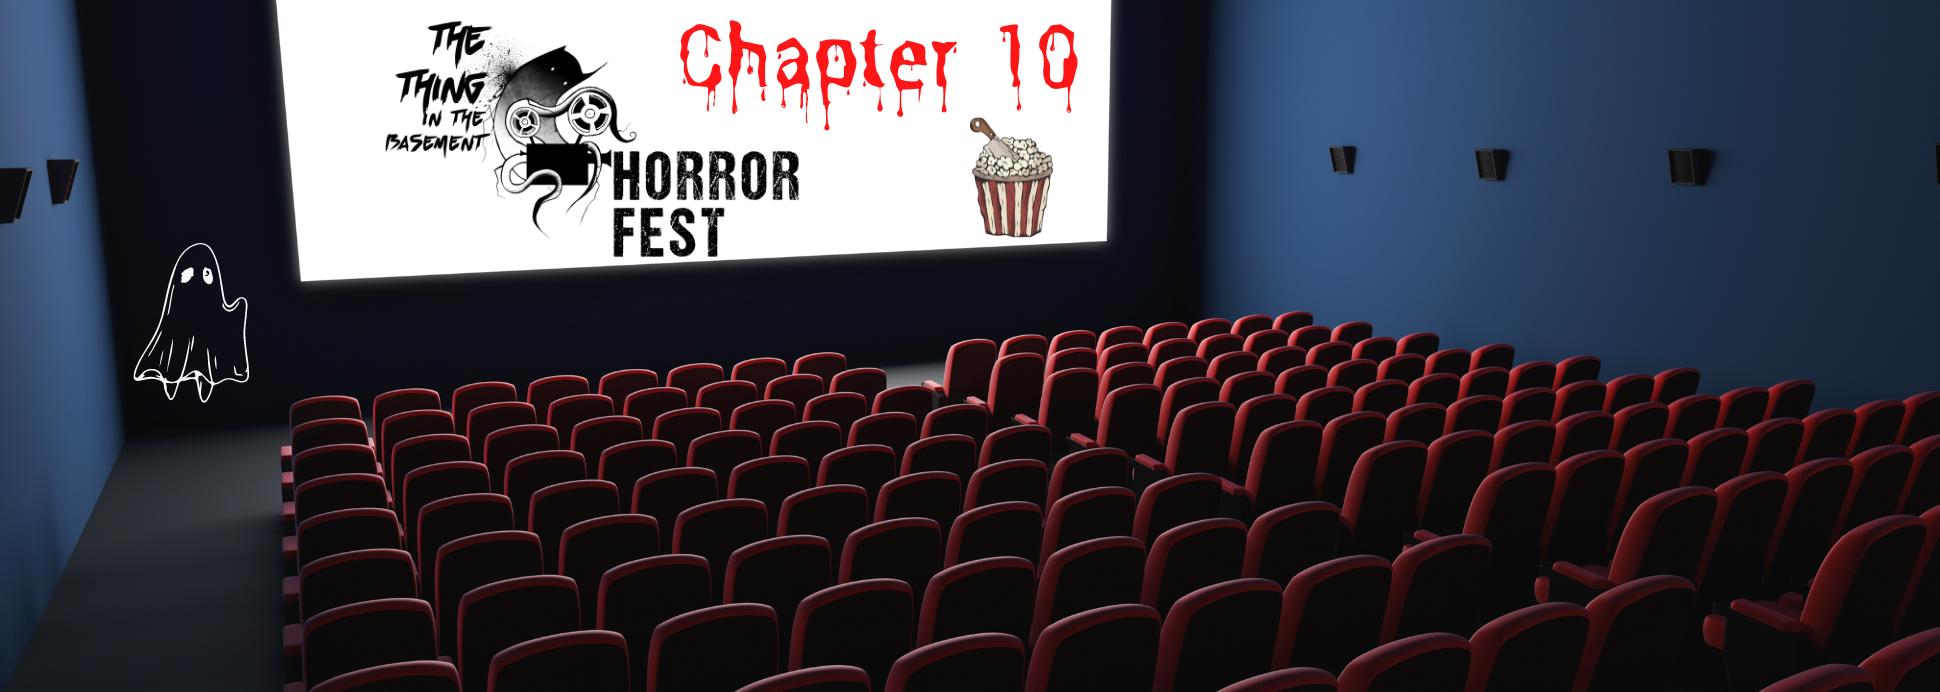 The Thing in the Basement Horror Fest - Chapter 10